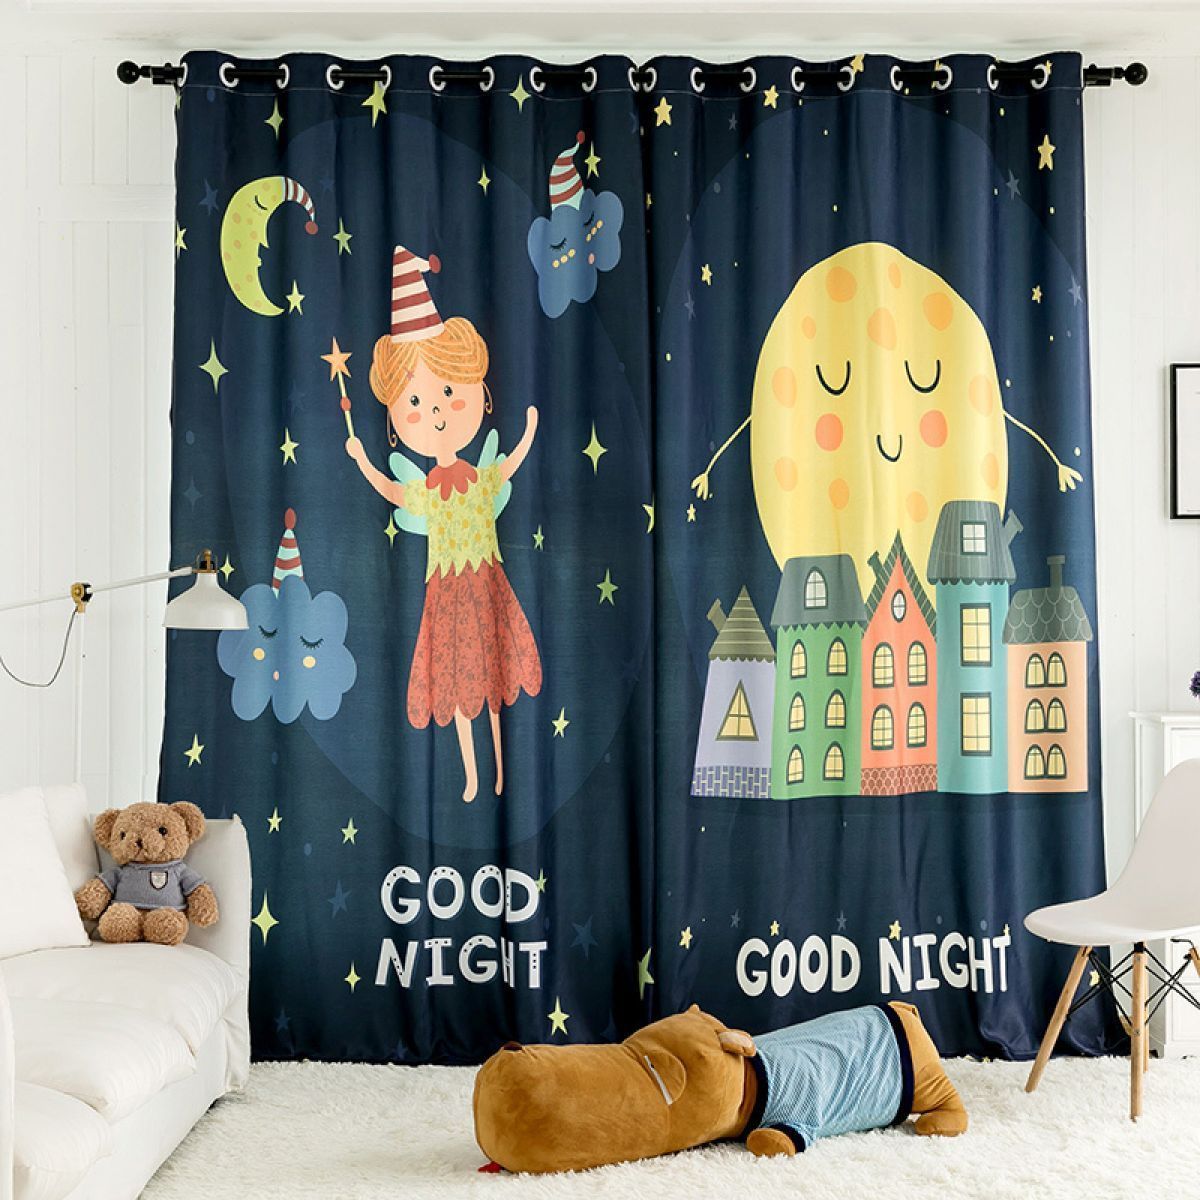 3d Fairy And House At Night Printed Window Curtain Home Decor